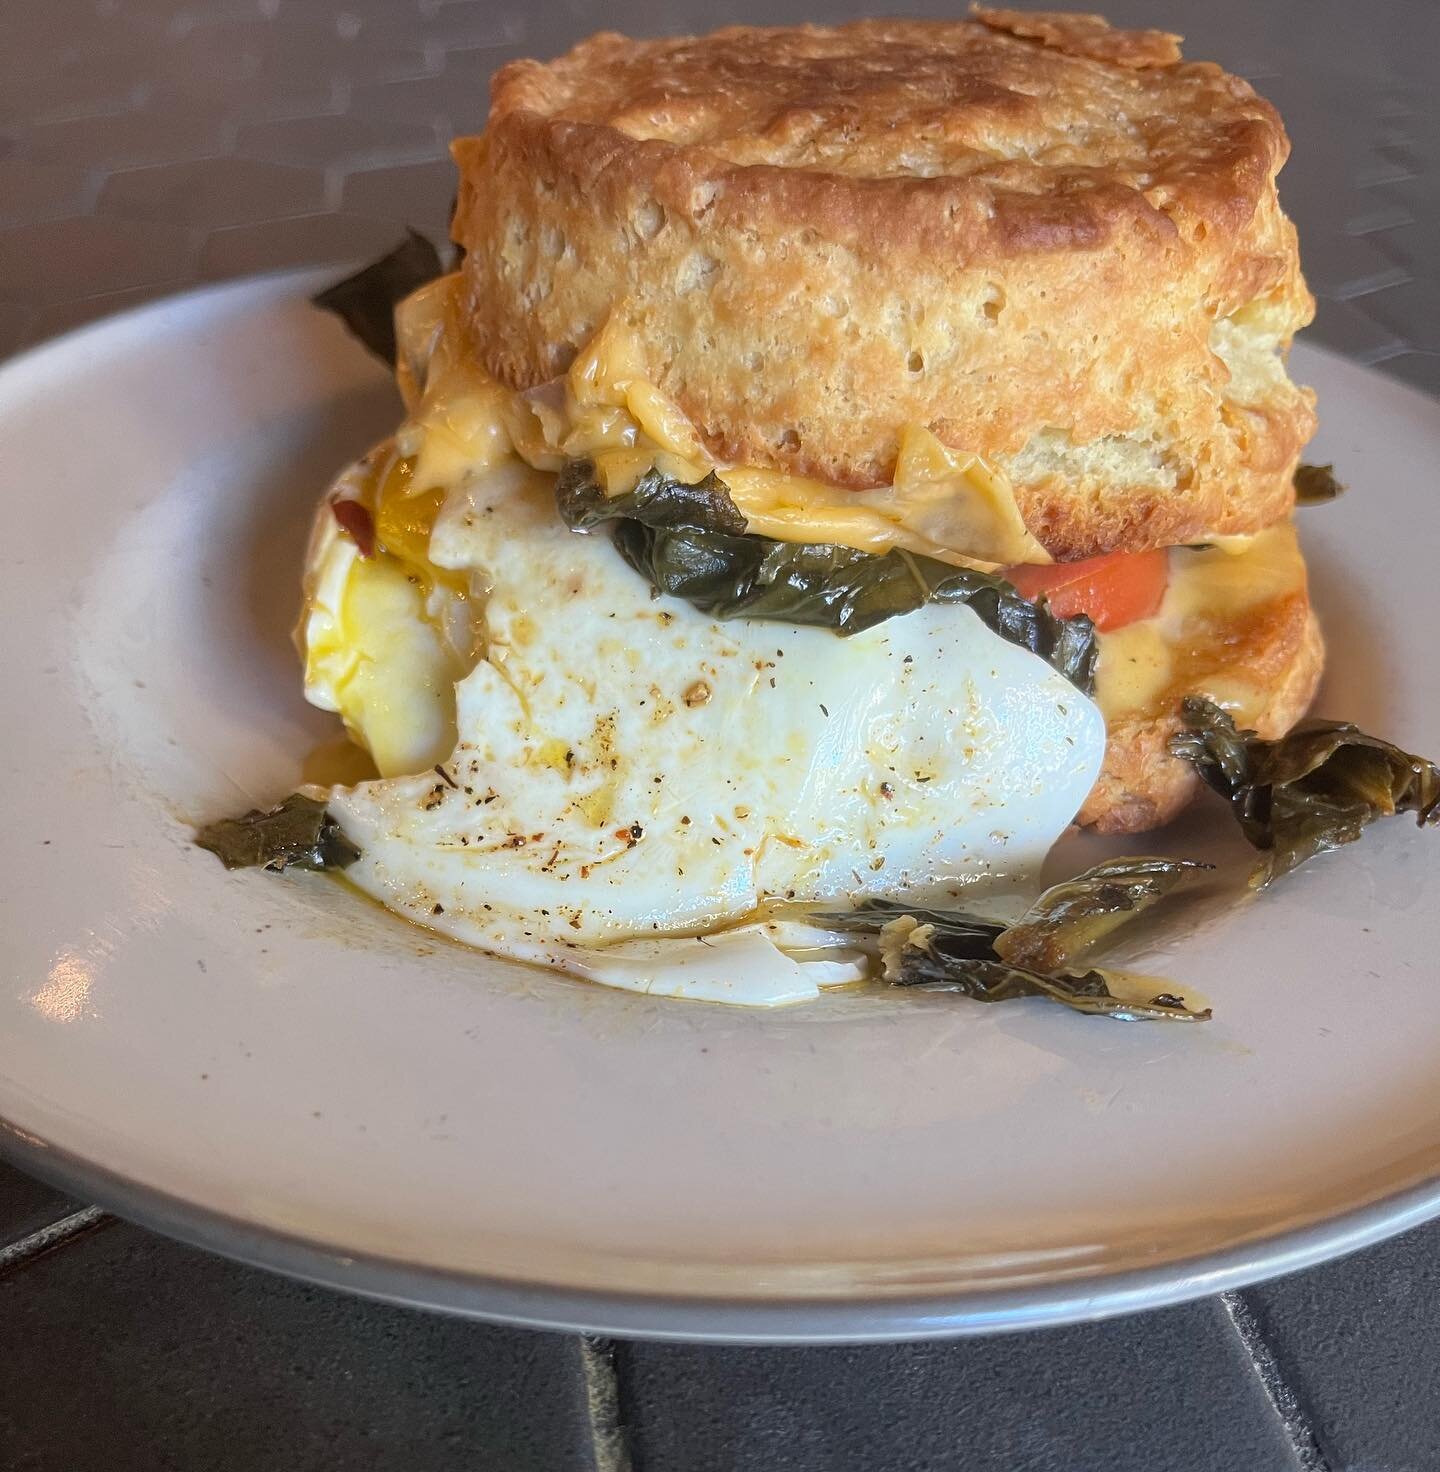 By very special request&hellip;enjoy any of our breakfast sandwiches on a giant homemade buttermilk biscuit!
☀️
☀️
Our biscuits are made from scratch and filled with as much love and butter as we can possibly fit into each batch! 
&bull;
&bull;
#upto